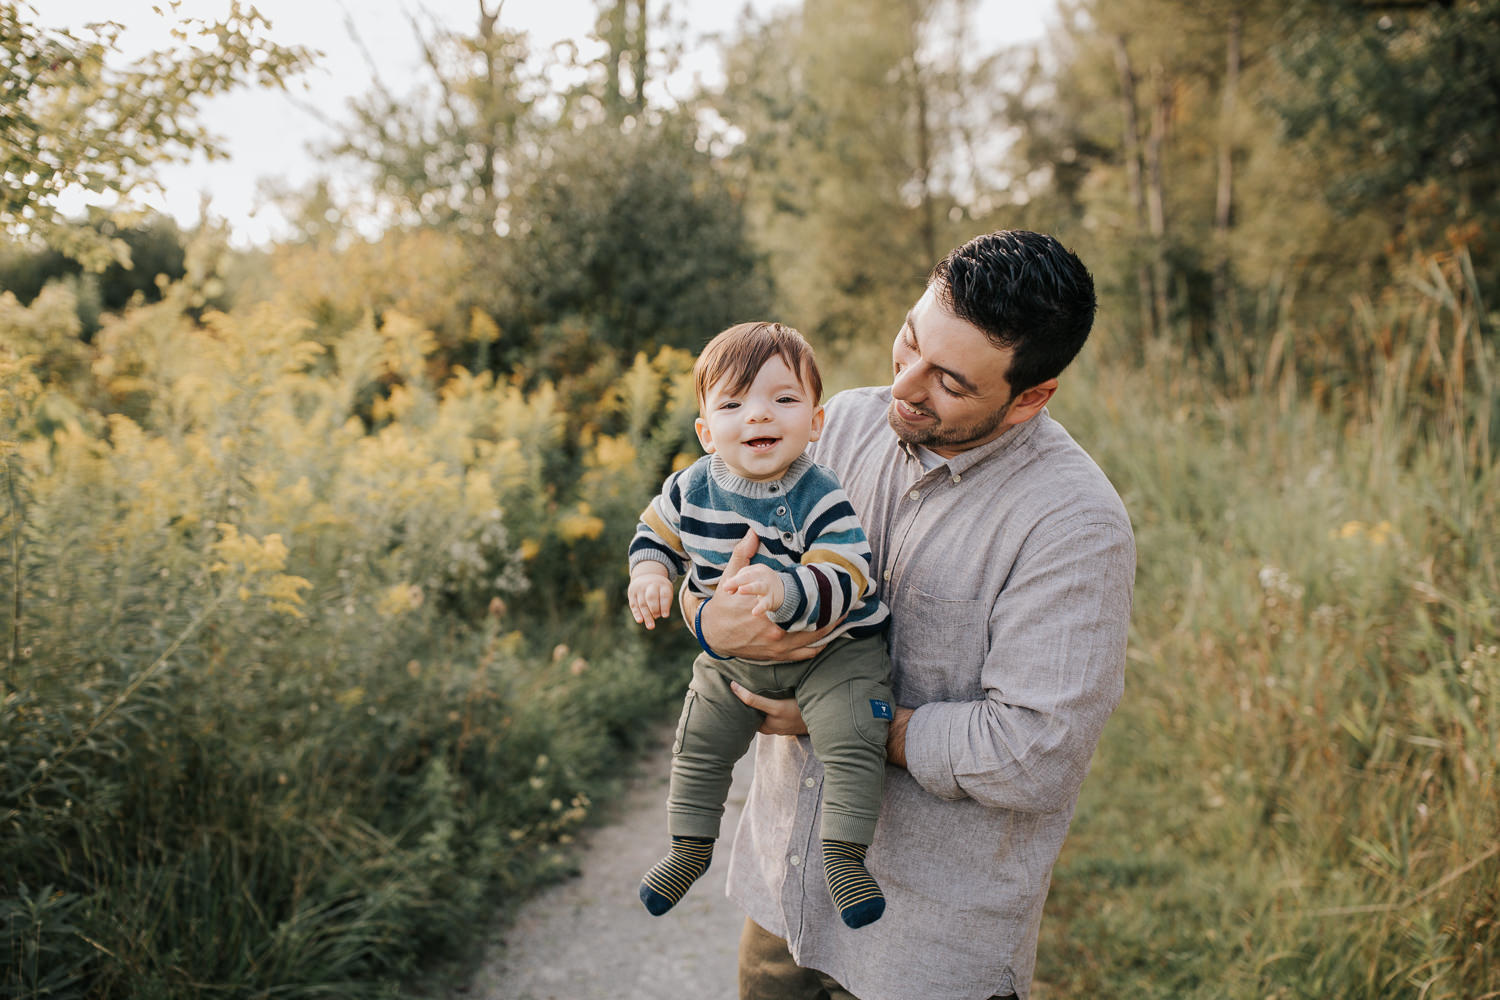 dad standing in golden field holding 1 year old baby boy, son smiling at camera, father smiling at him - York Region Lifestyle Photos